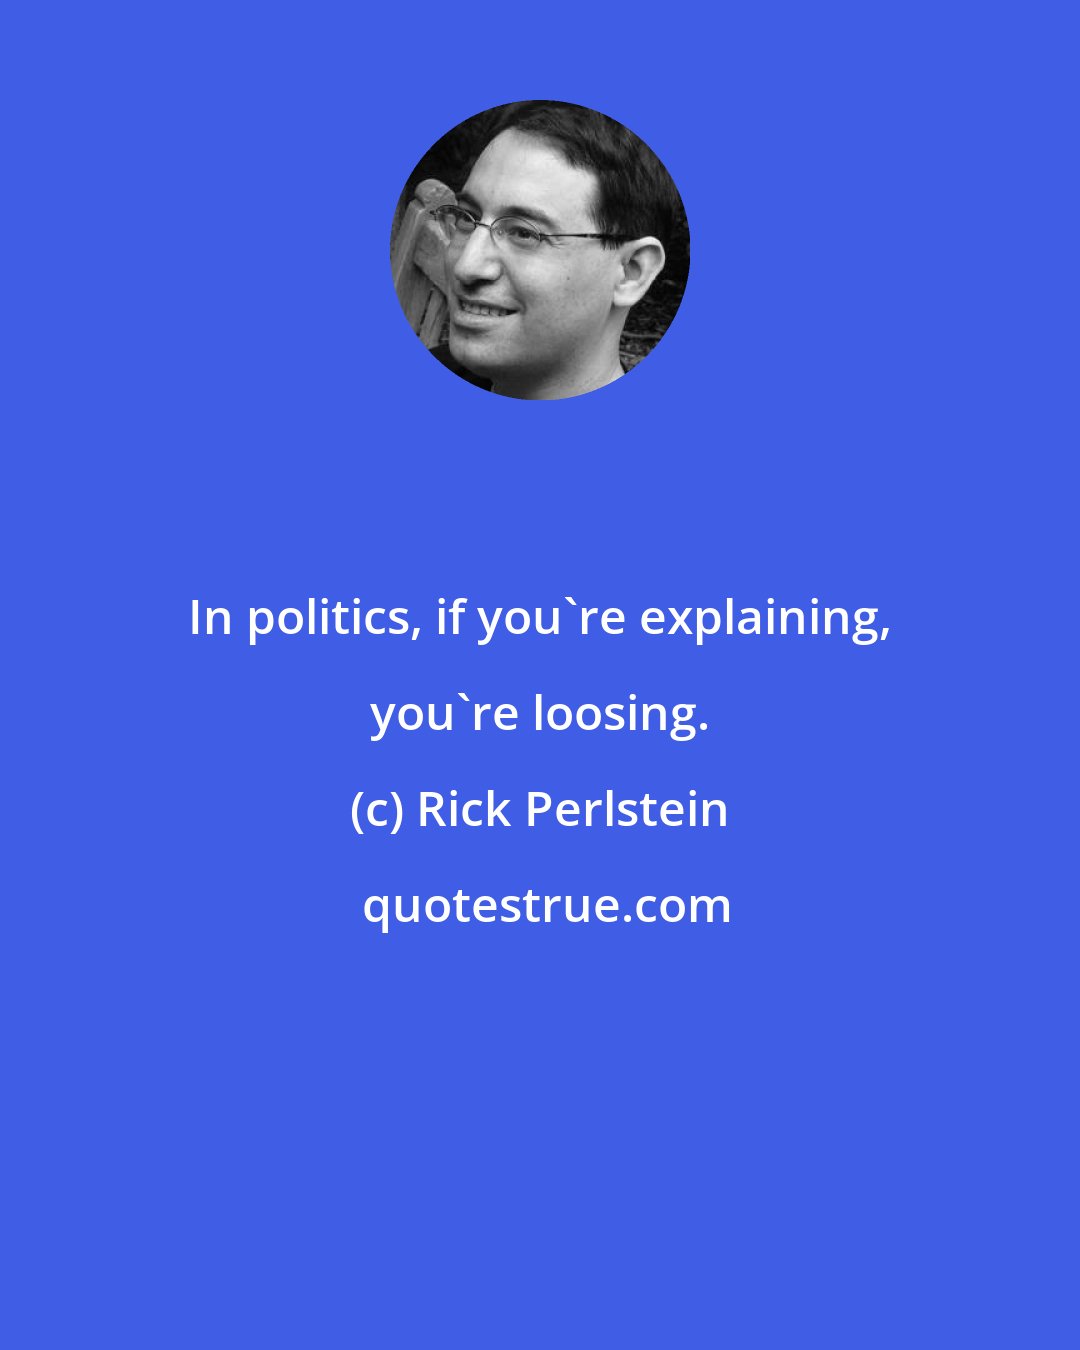 Rick Perlstein: In politics, if you're explaining, you're loosing.